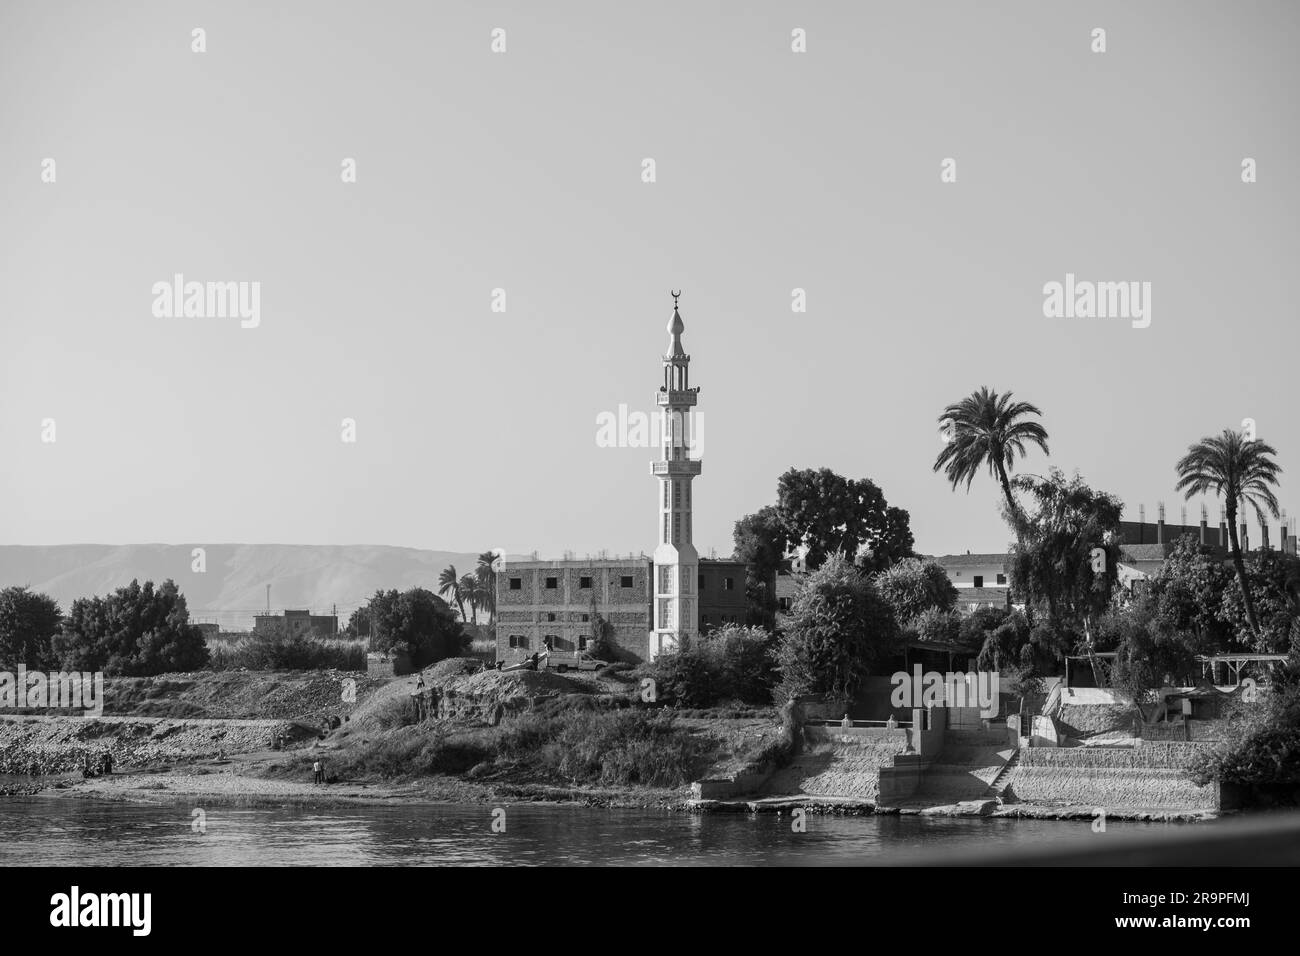 Mosque by the side of the Nile River Stock Photo